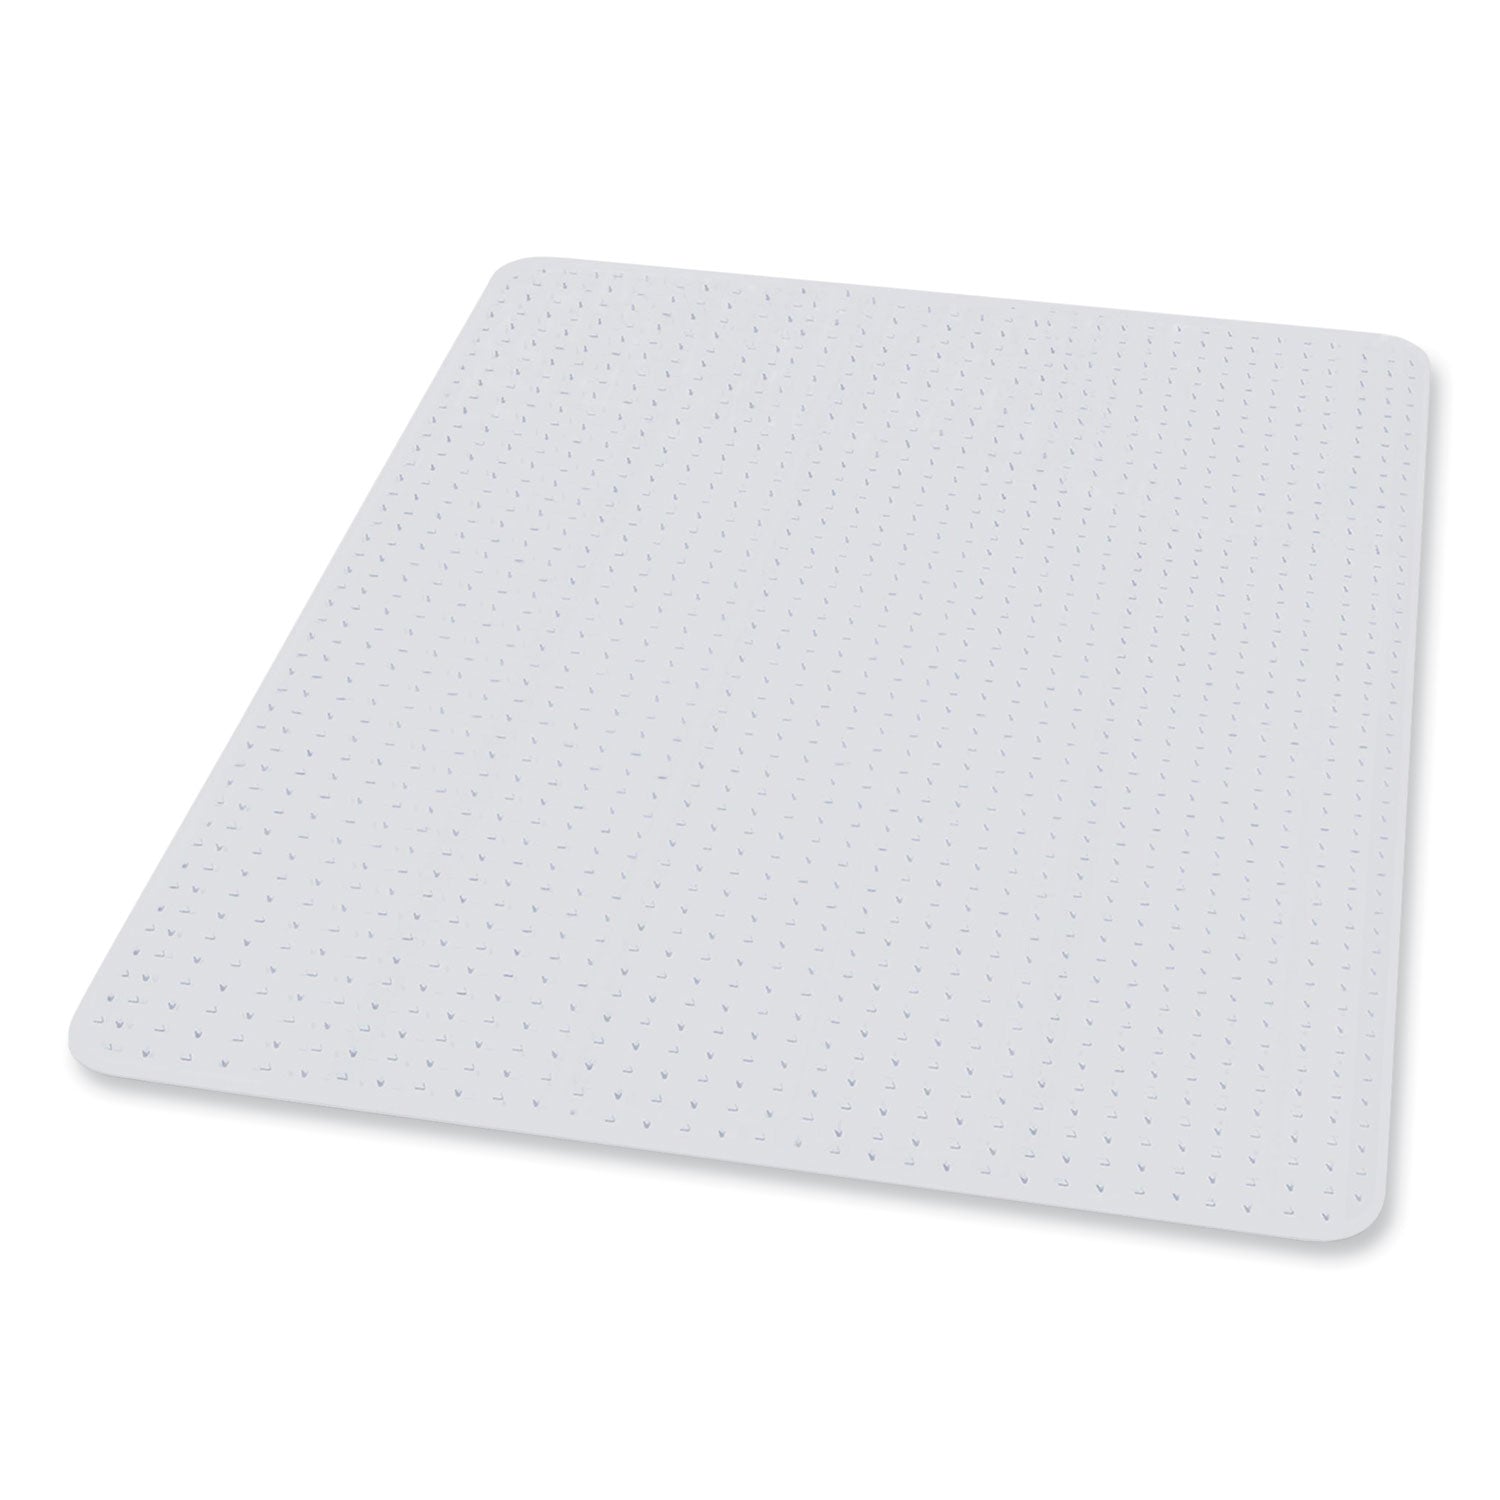 everlife-chair-mat-for-extra-high-pile-carpet-72-x-96-clear-ships-in-7-10-business-days_esr124918 - 1